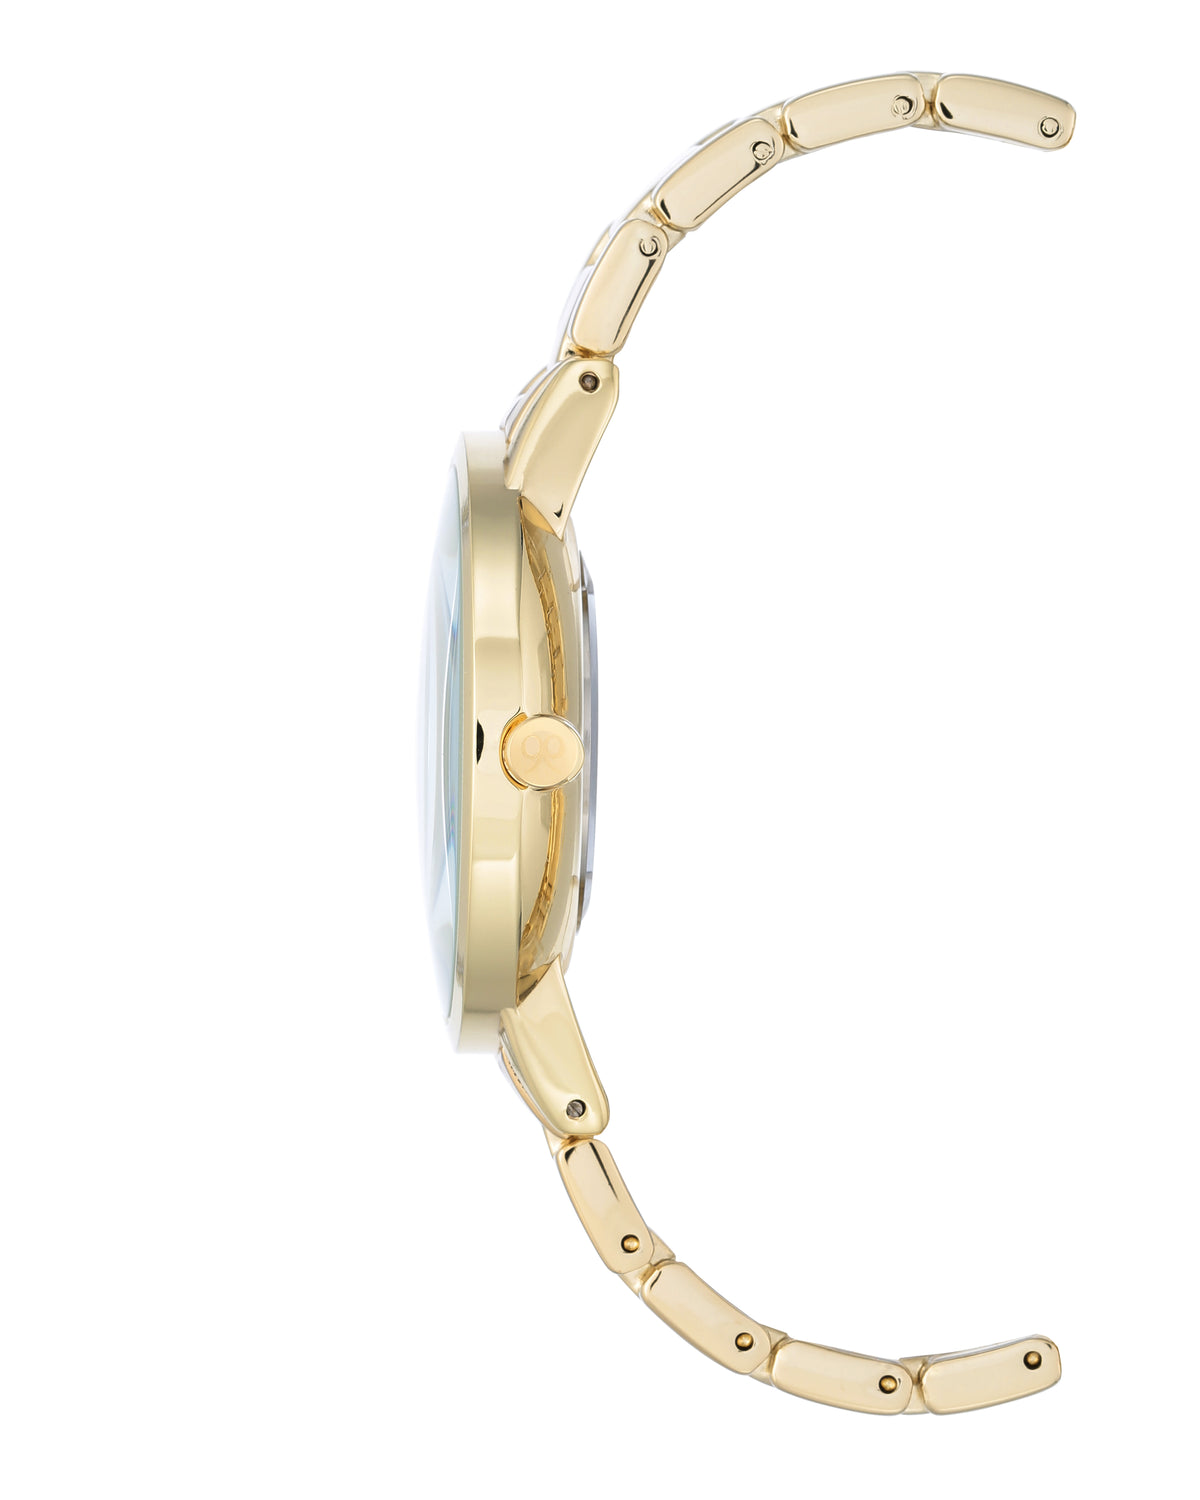 Crystal Accented Bracelet Watch